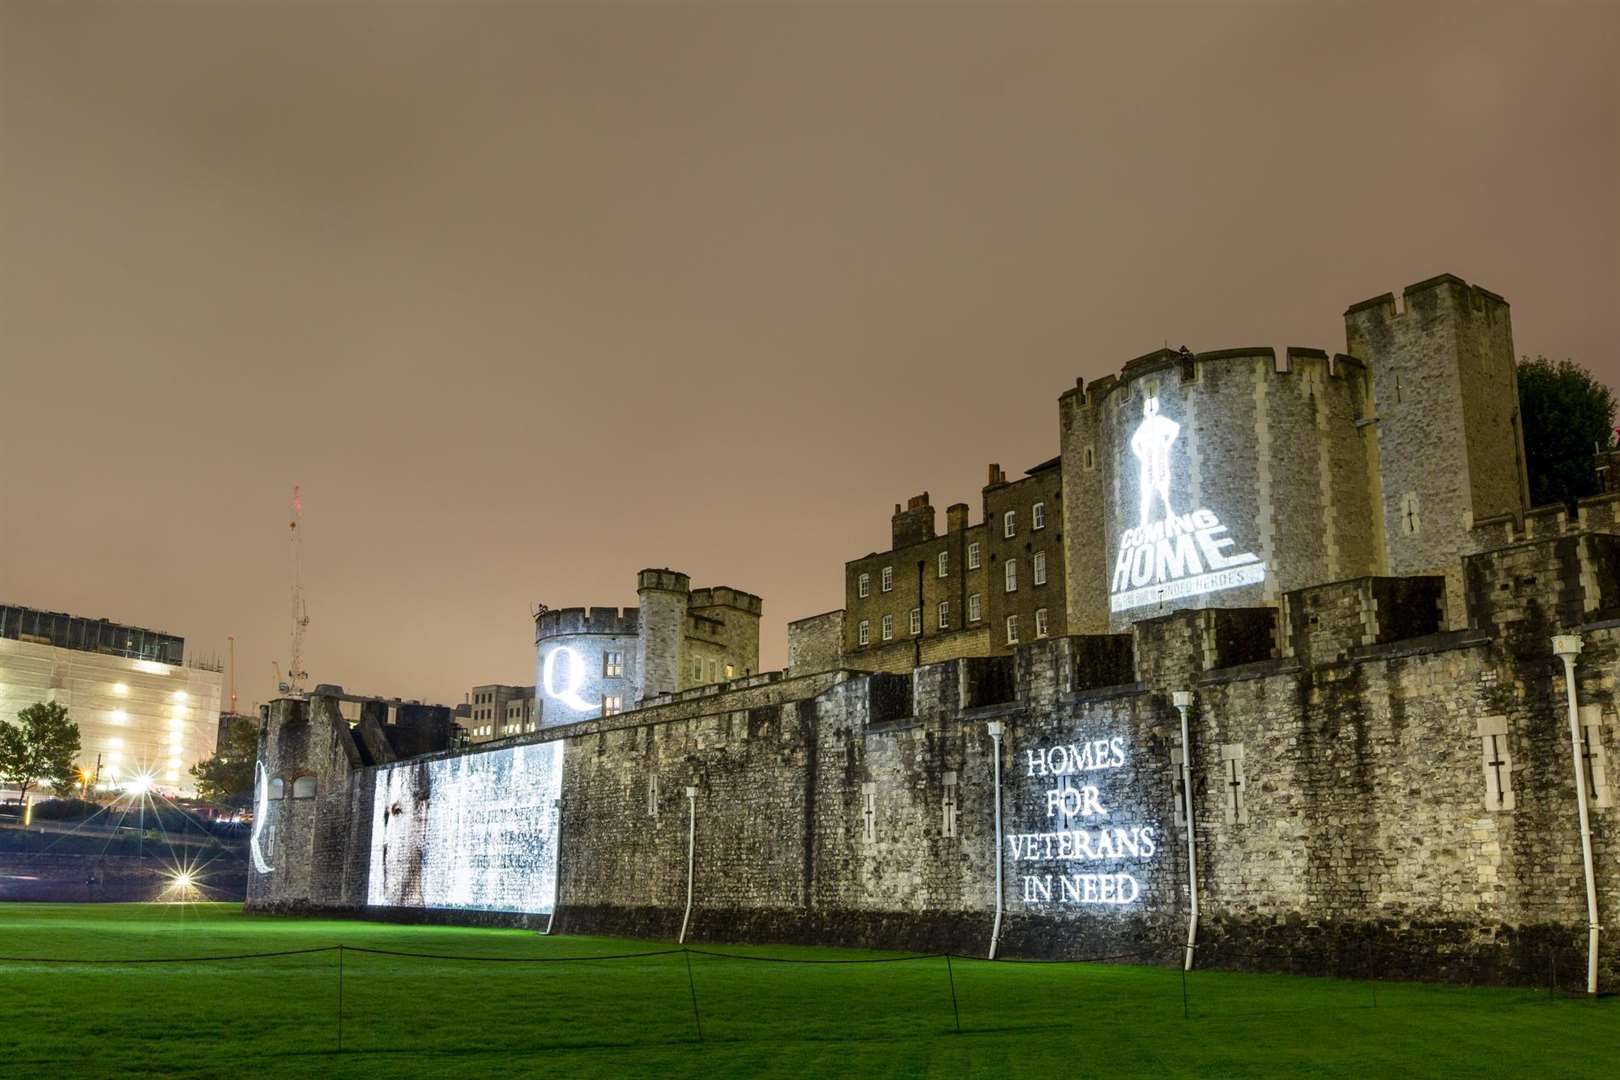 Haig Housing's Coming Home campaign on Tower of London